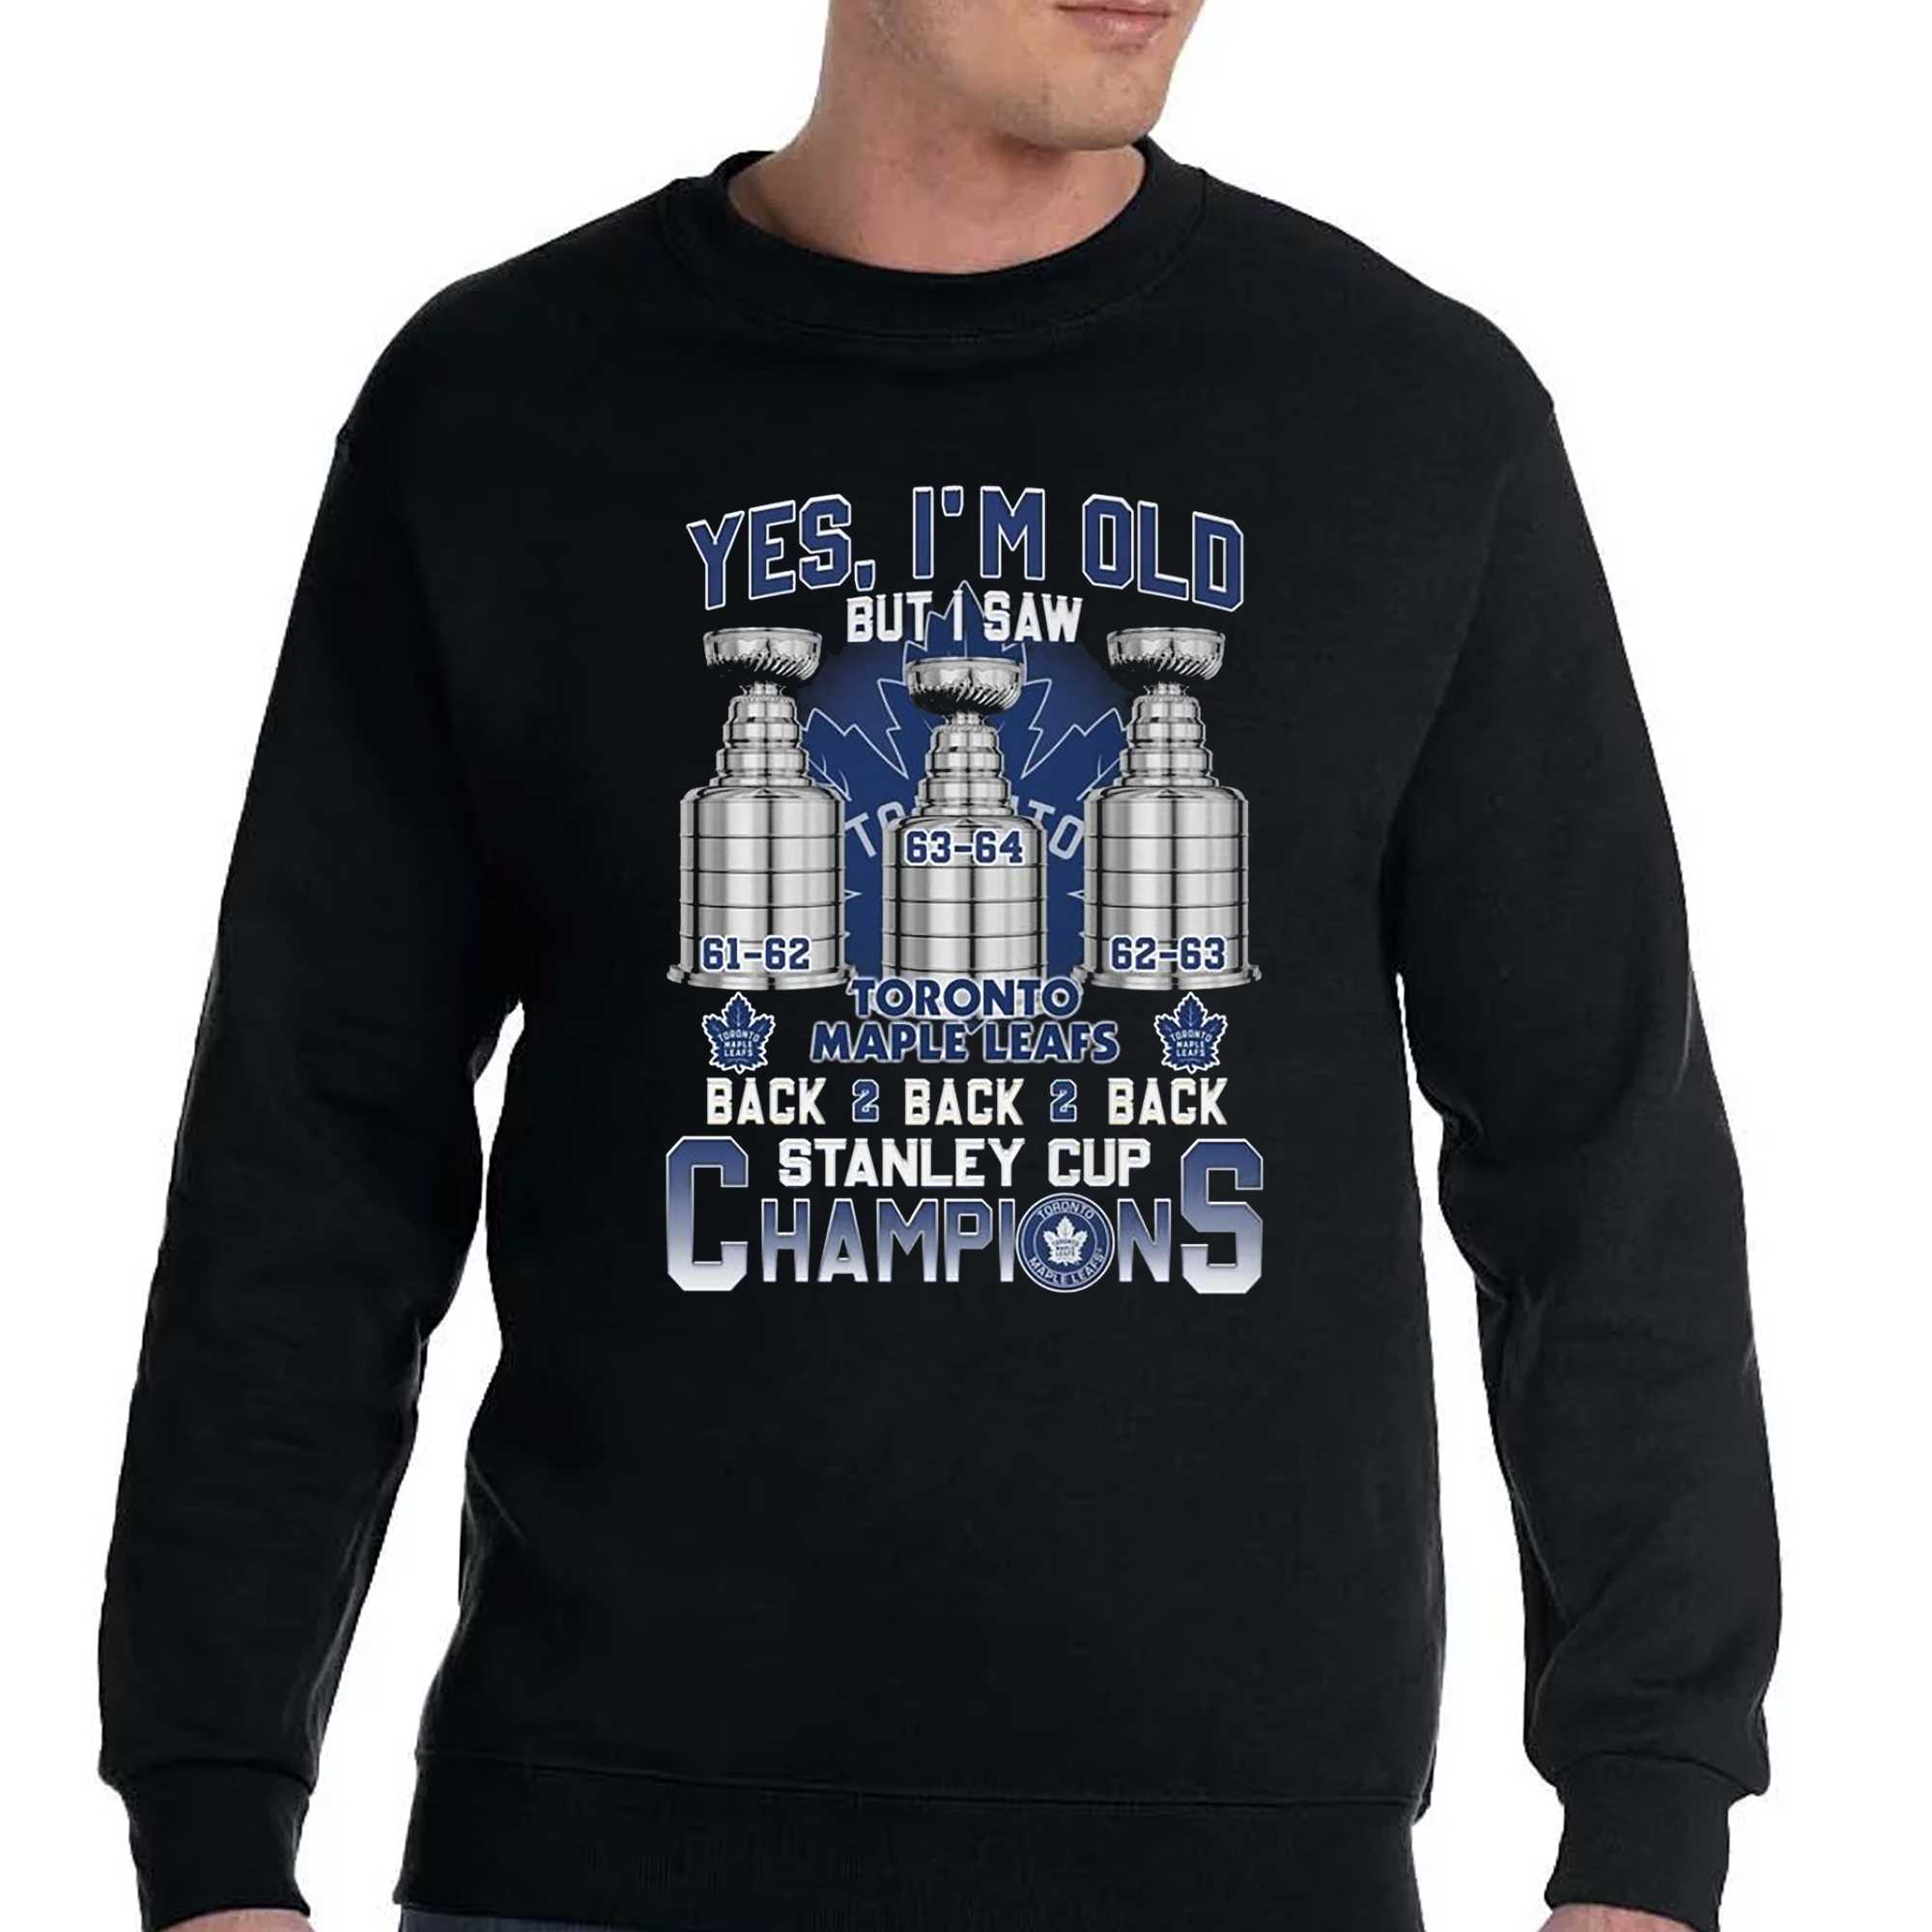 https://shibtee.com/wp-content/uploads/2023/10/yes-im-old-but-i-saw-toronto-maple-leafs-back-2-back-2-back-stanley-cup-champions-t-shirt-4.jpg